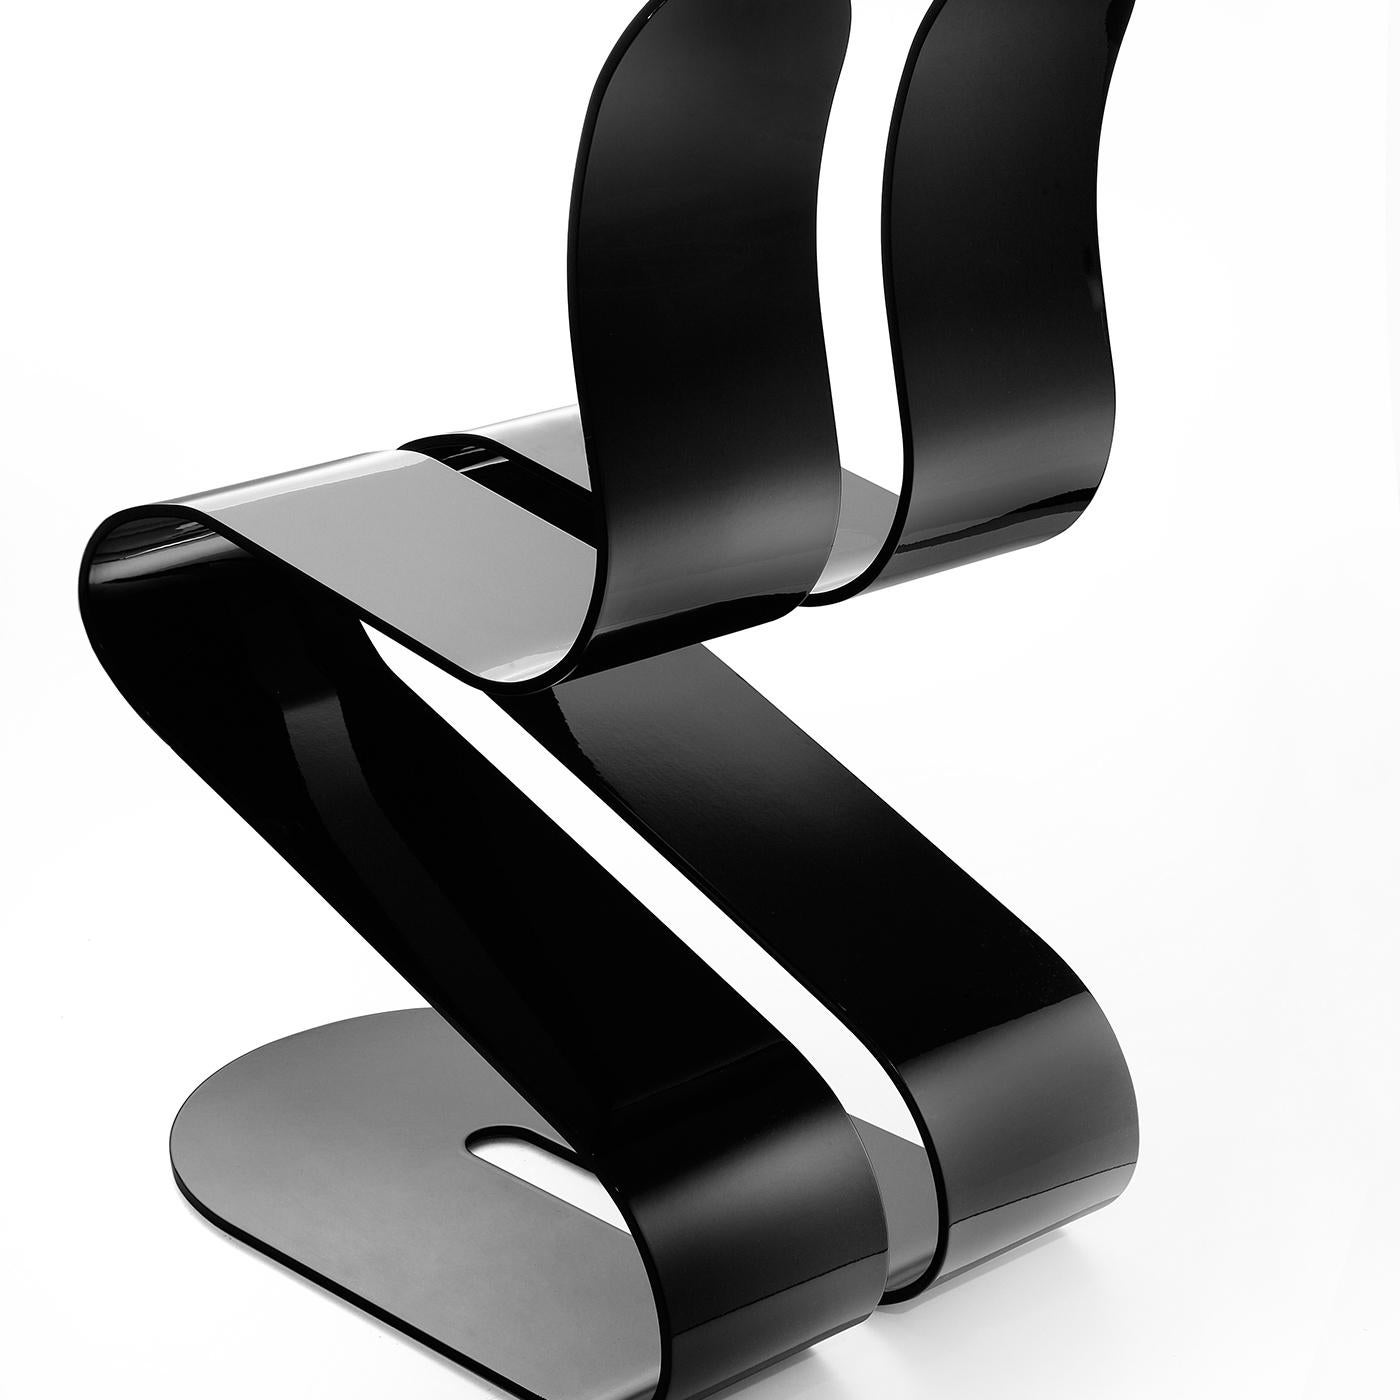 Handcrafted of a single piece of aluminum artfully bent to resemble a ribbon, this chair's design is inspired by the natural curves of the body. The ergonomic silhouette provides support to the back while the cut in the center gives flexibility to